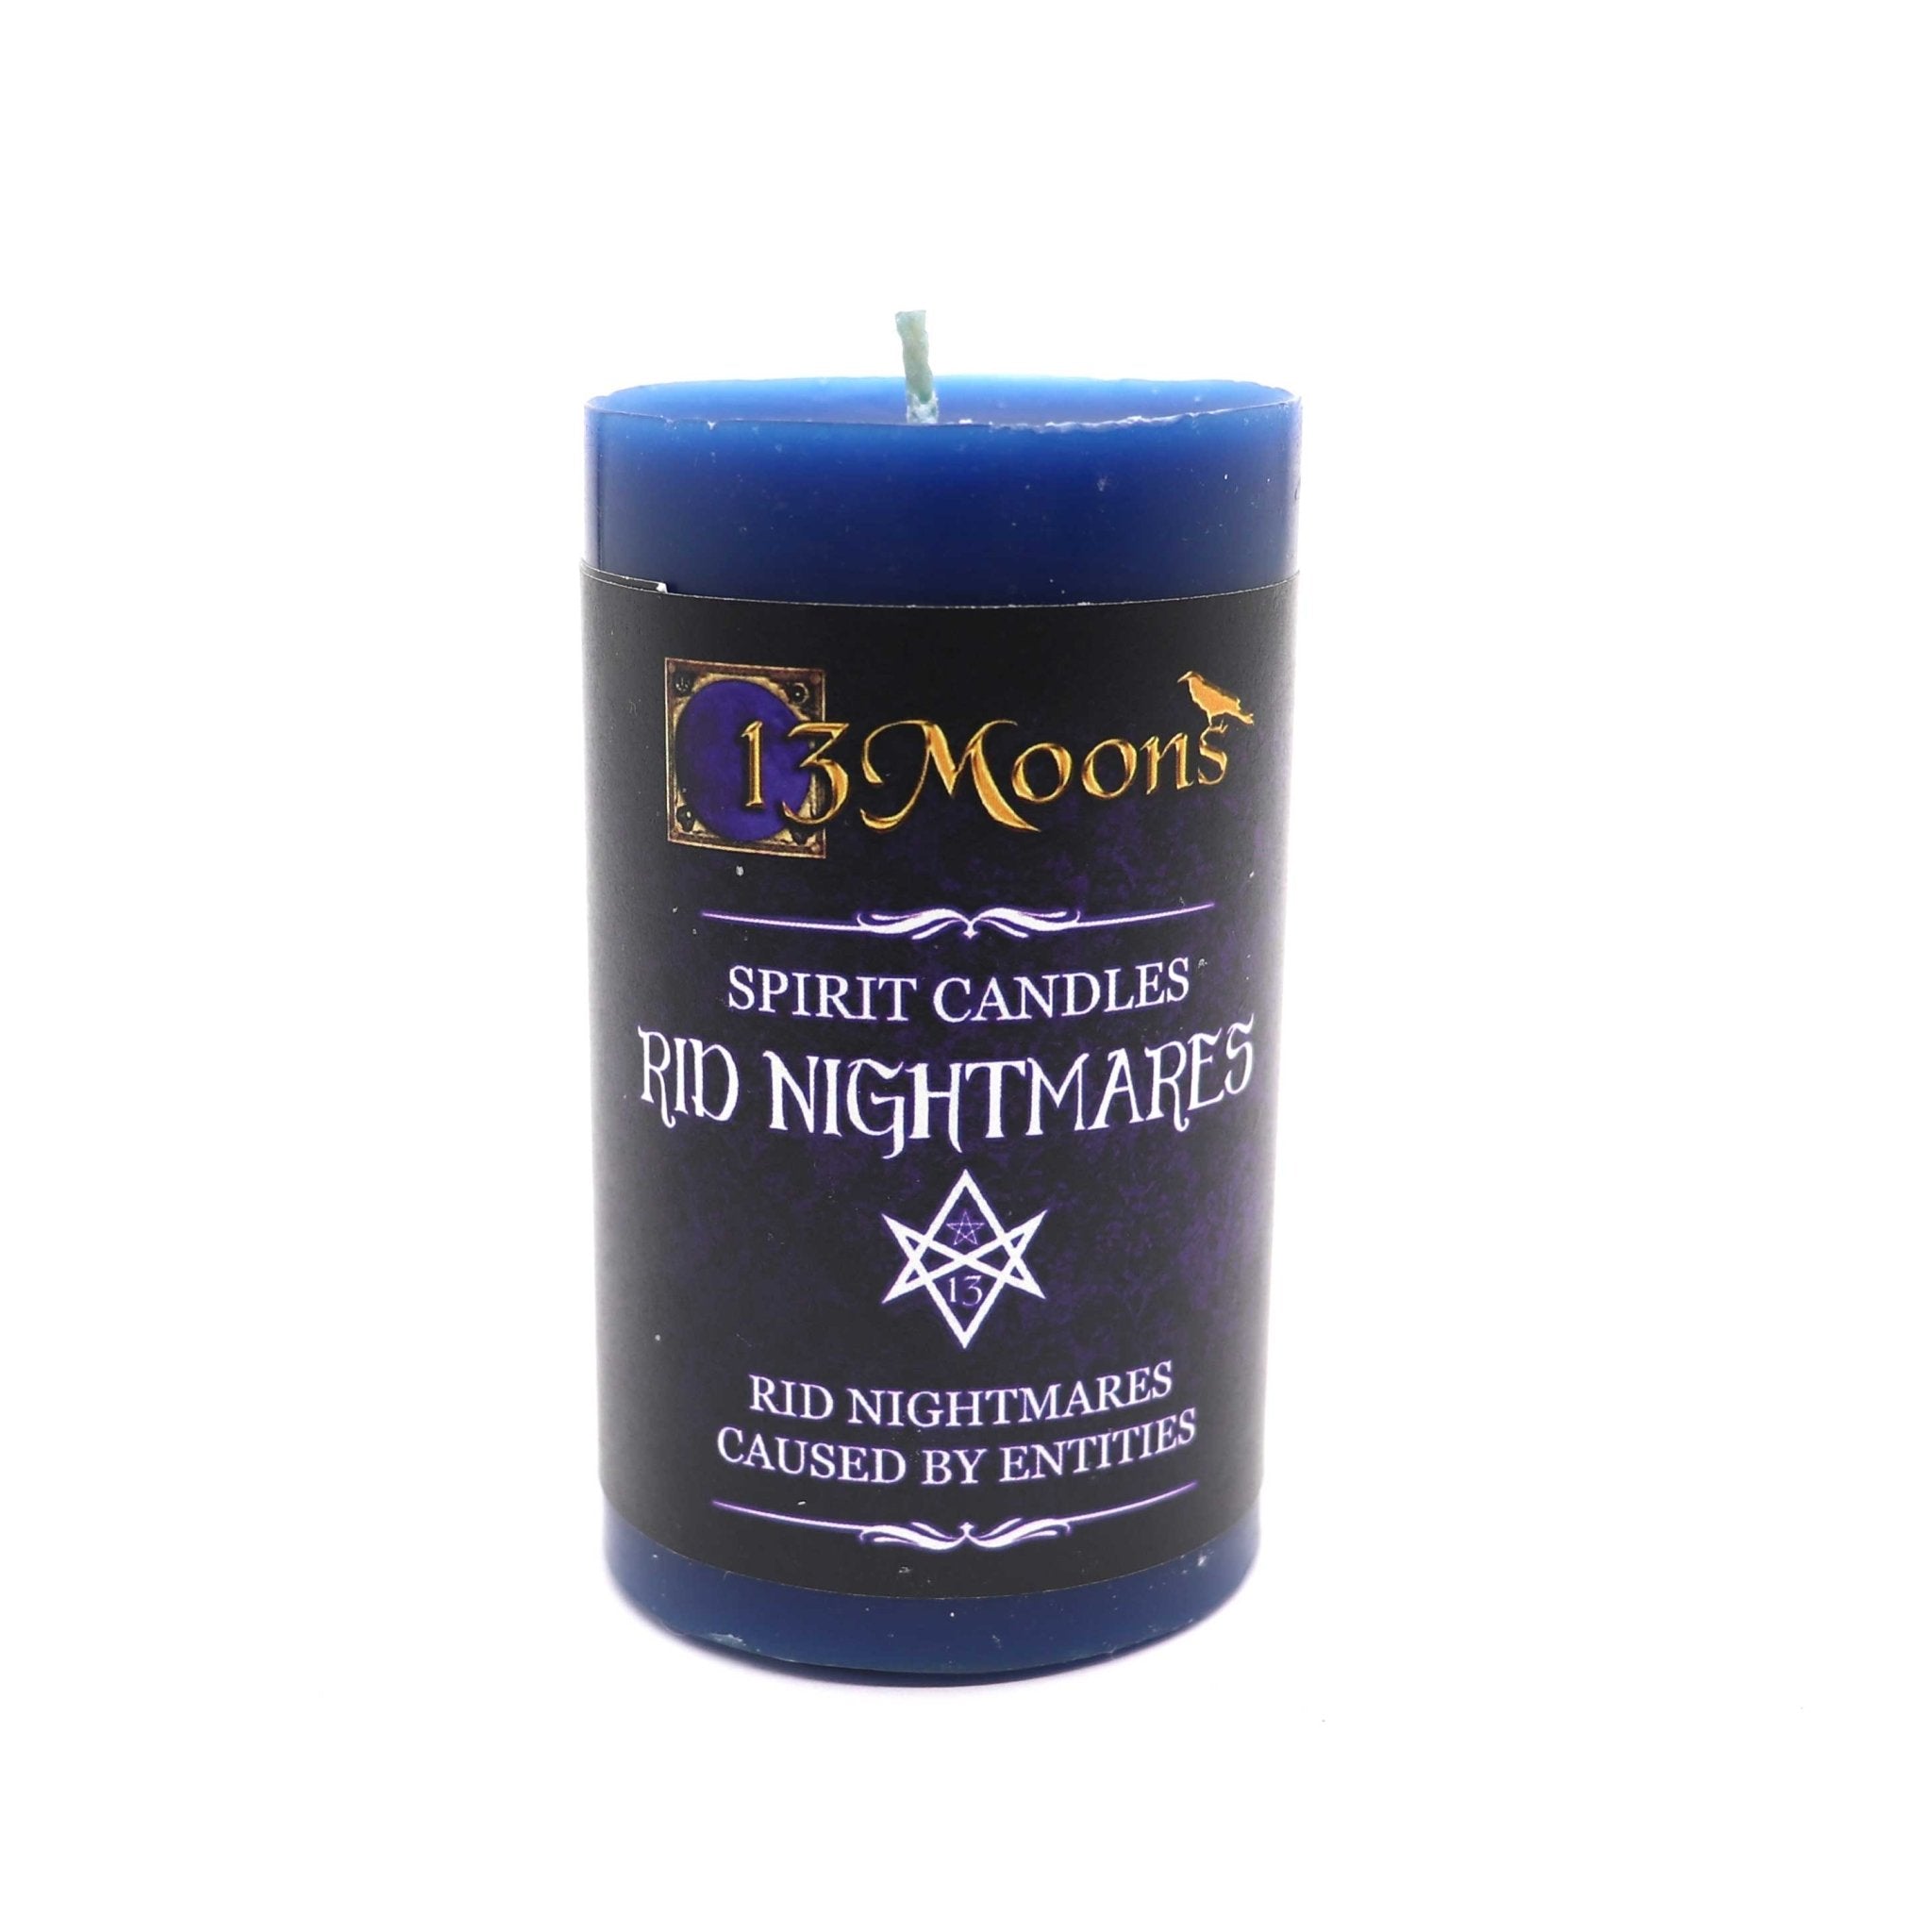 Rid Nightmares Candle - 13 Moons